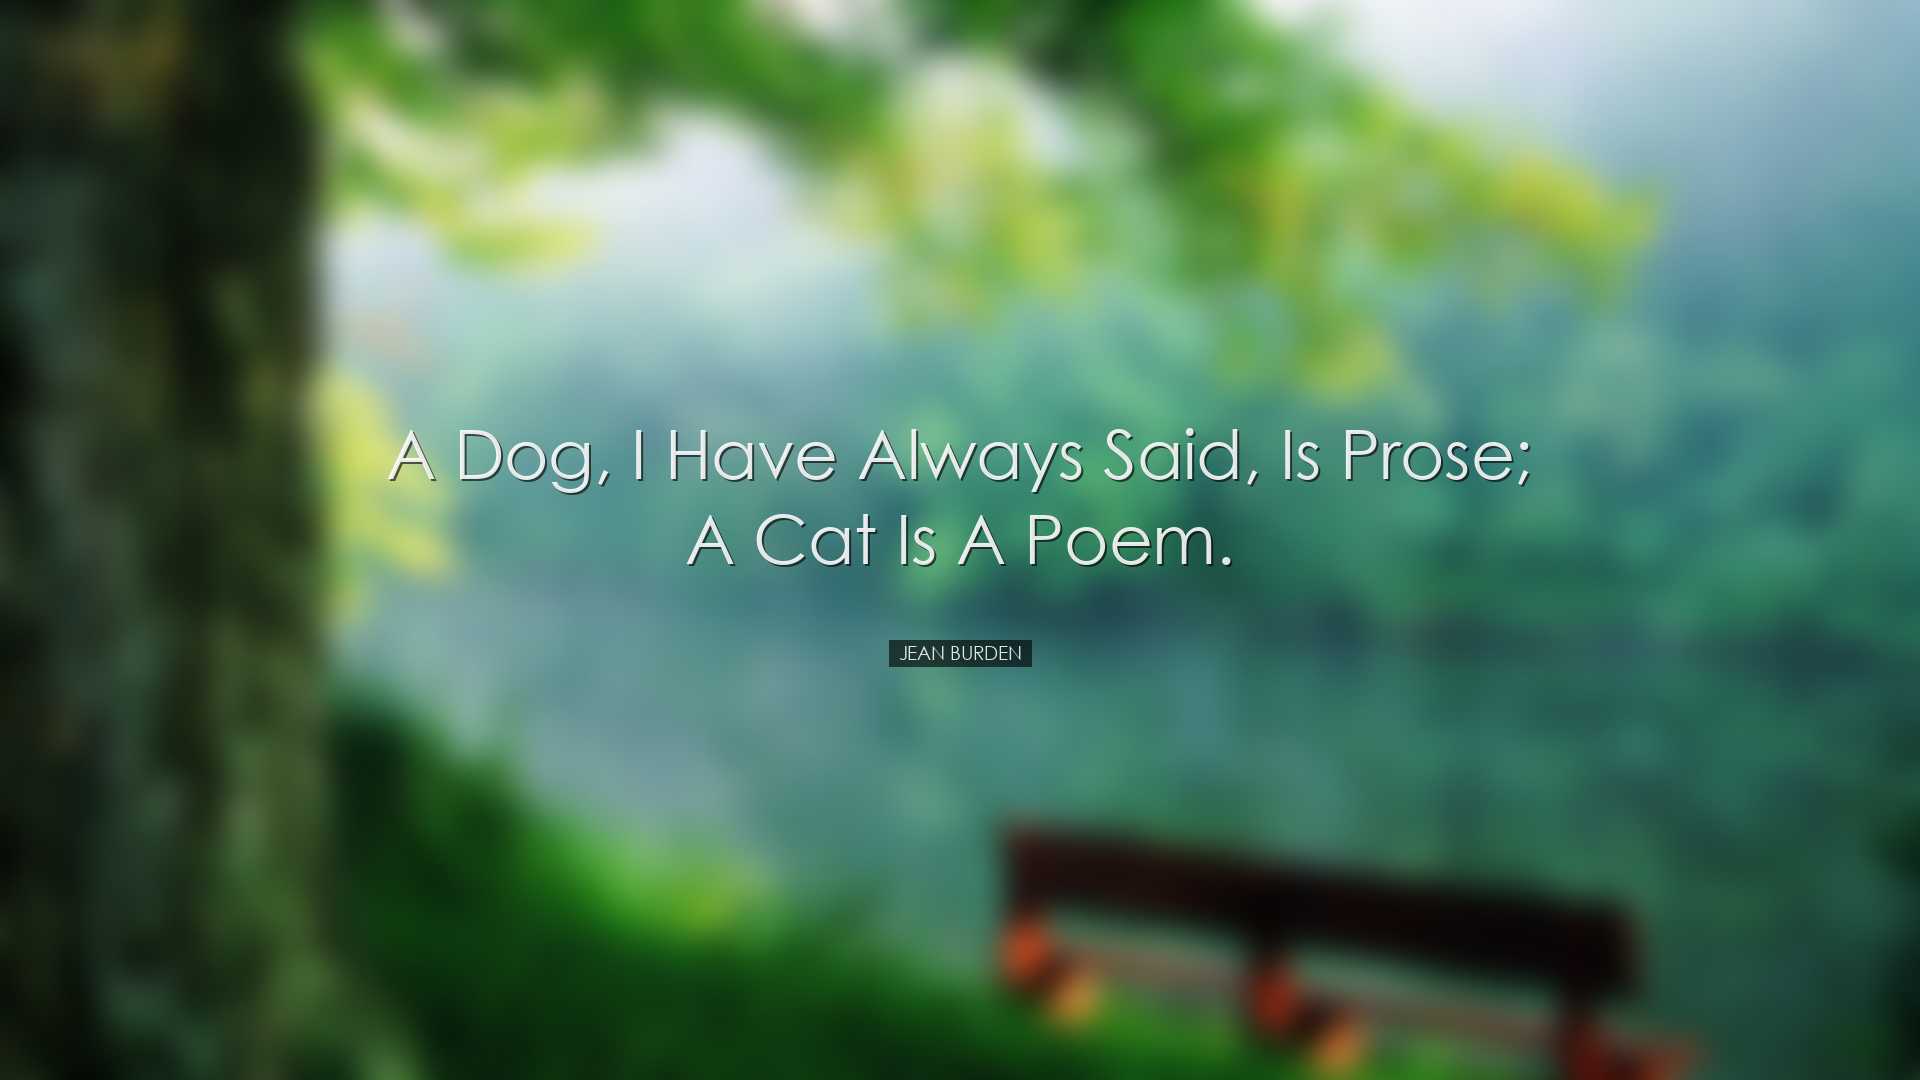 A dog, I have always said, is prose; a cat is a poem. - Jean Burde